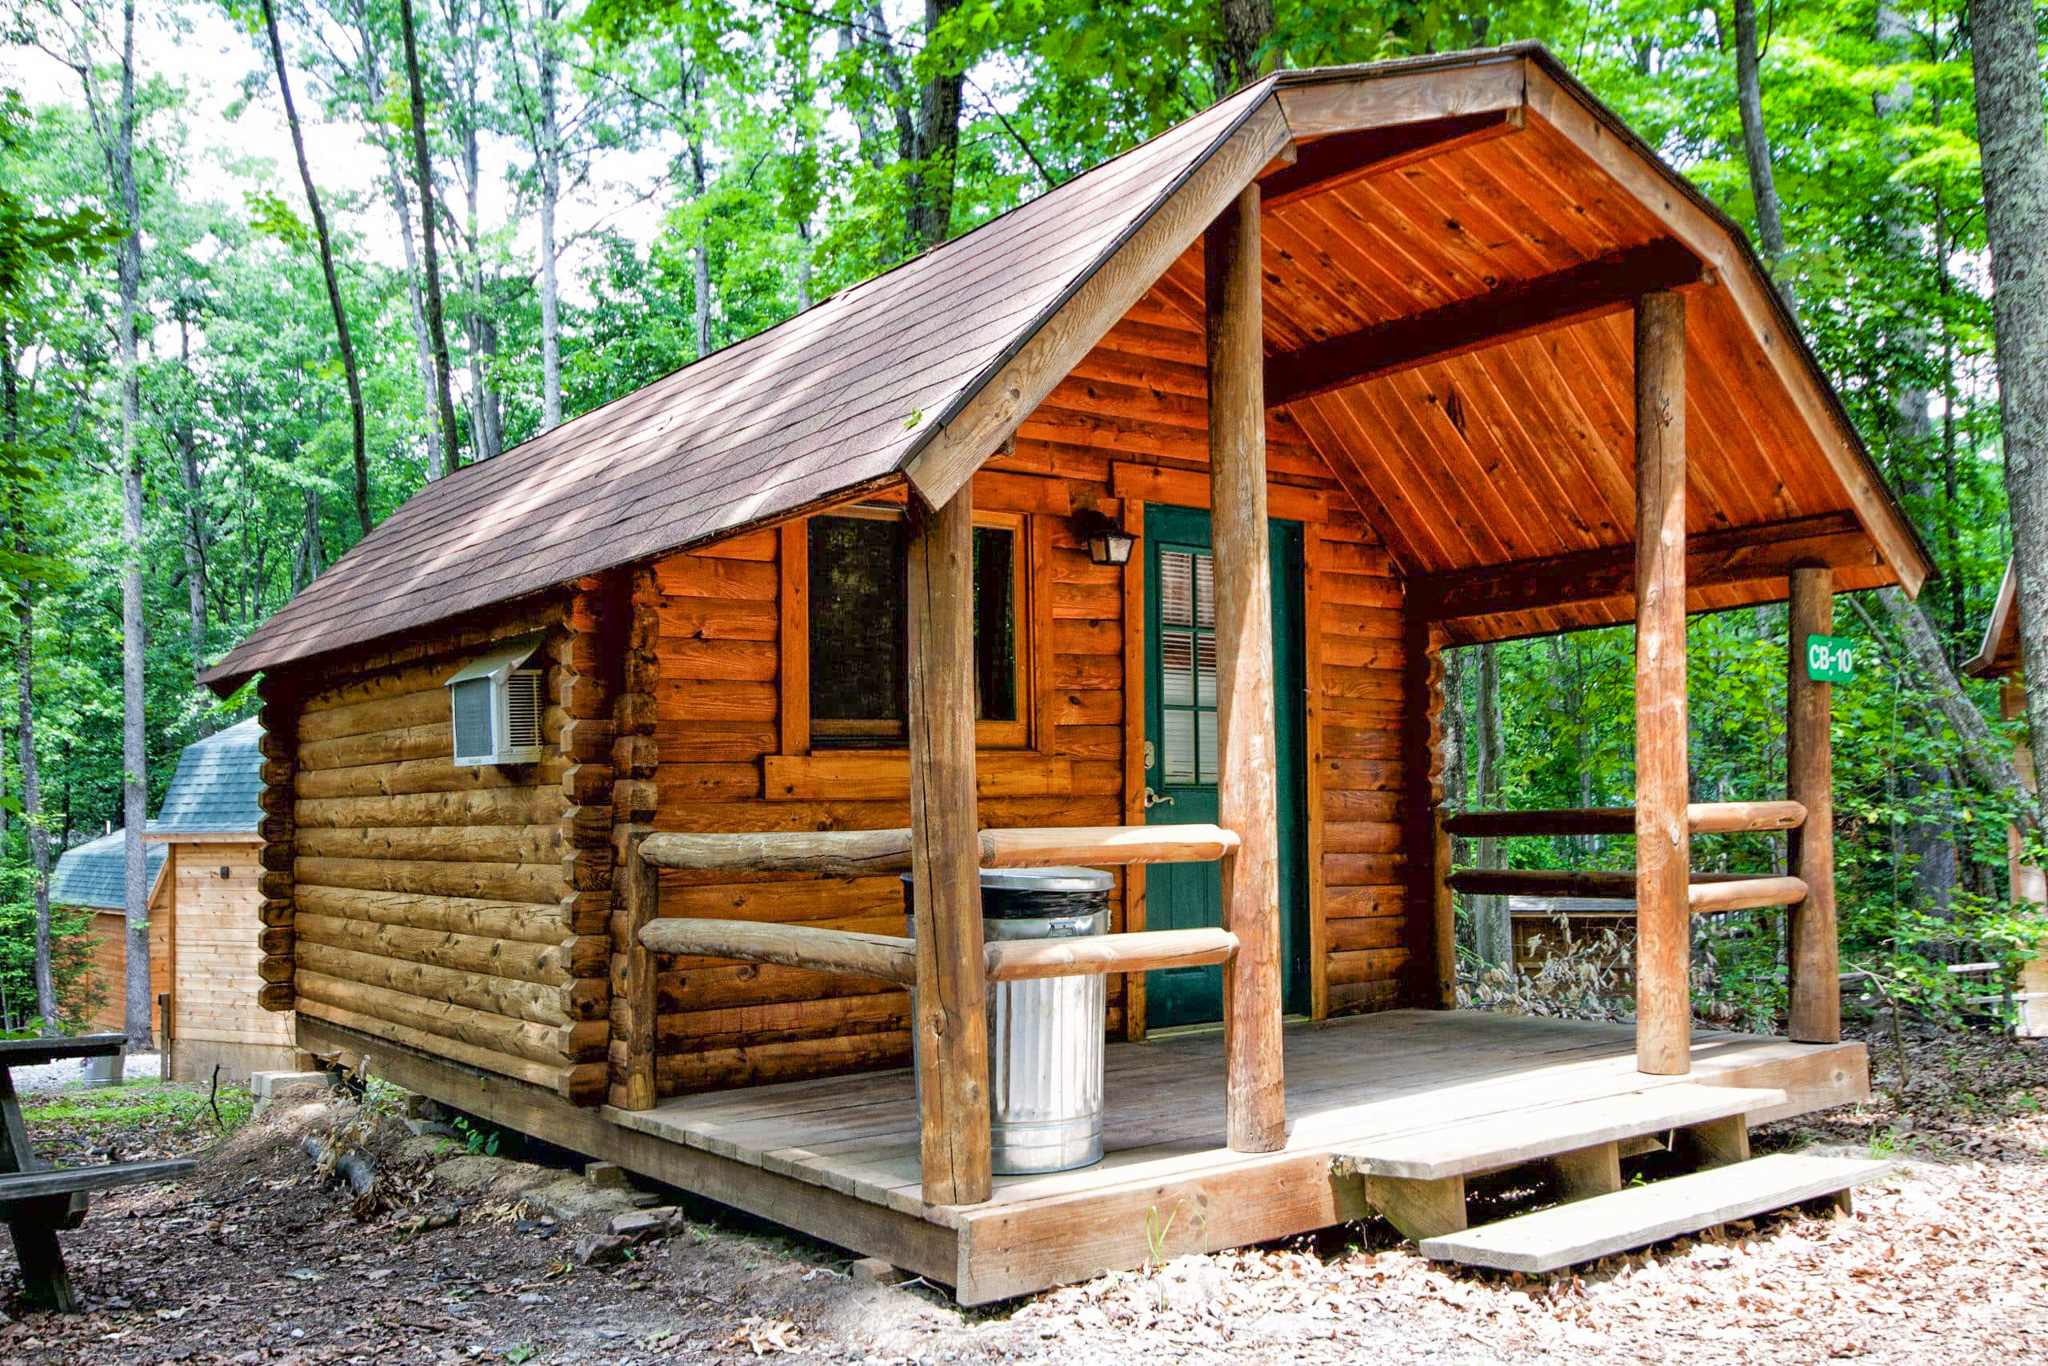 Country Cabin - Rustic Cabins - Adventures on the Gorge